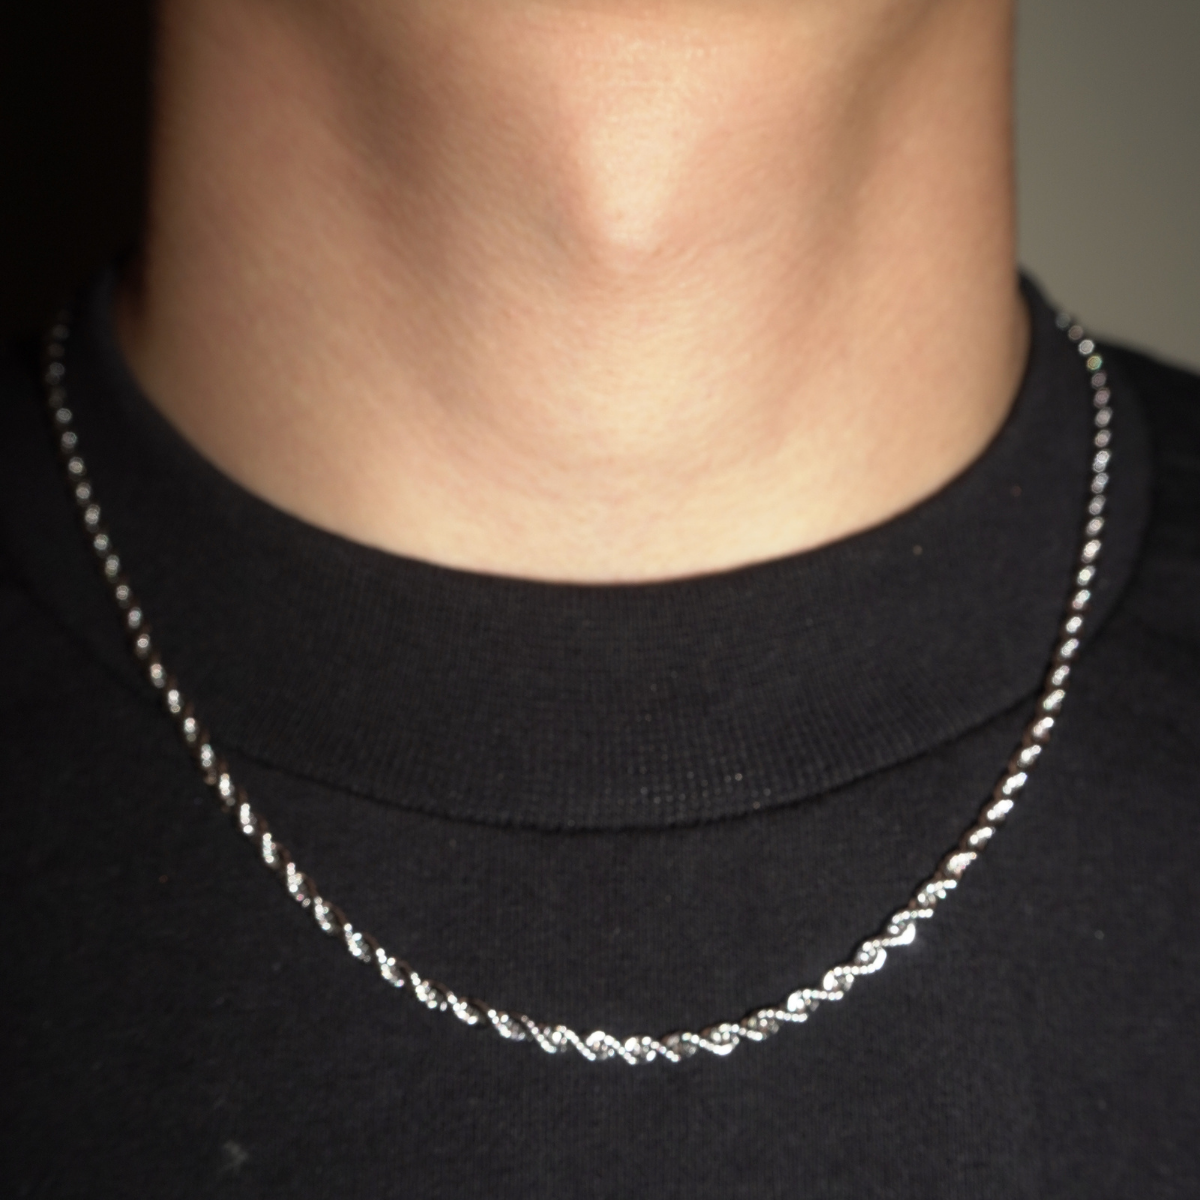 ROPE CHAIN 3MM